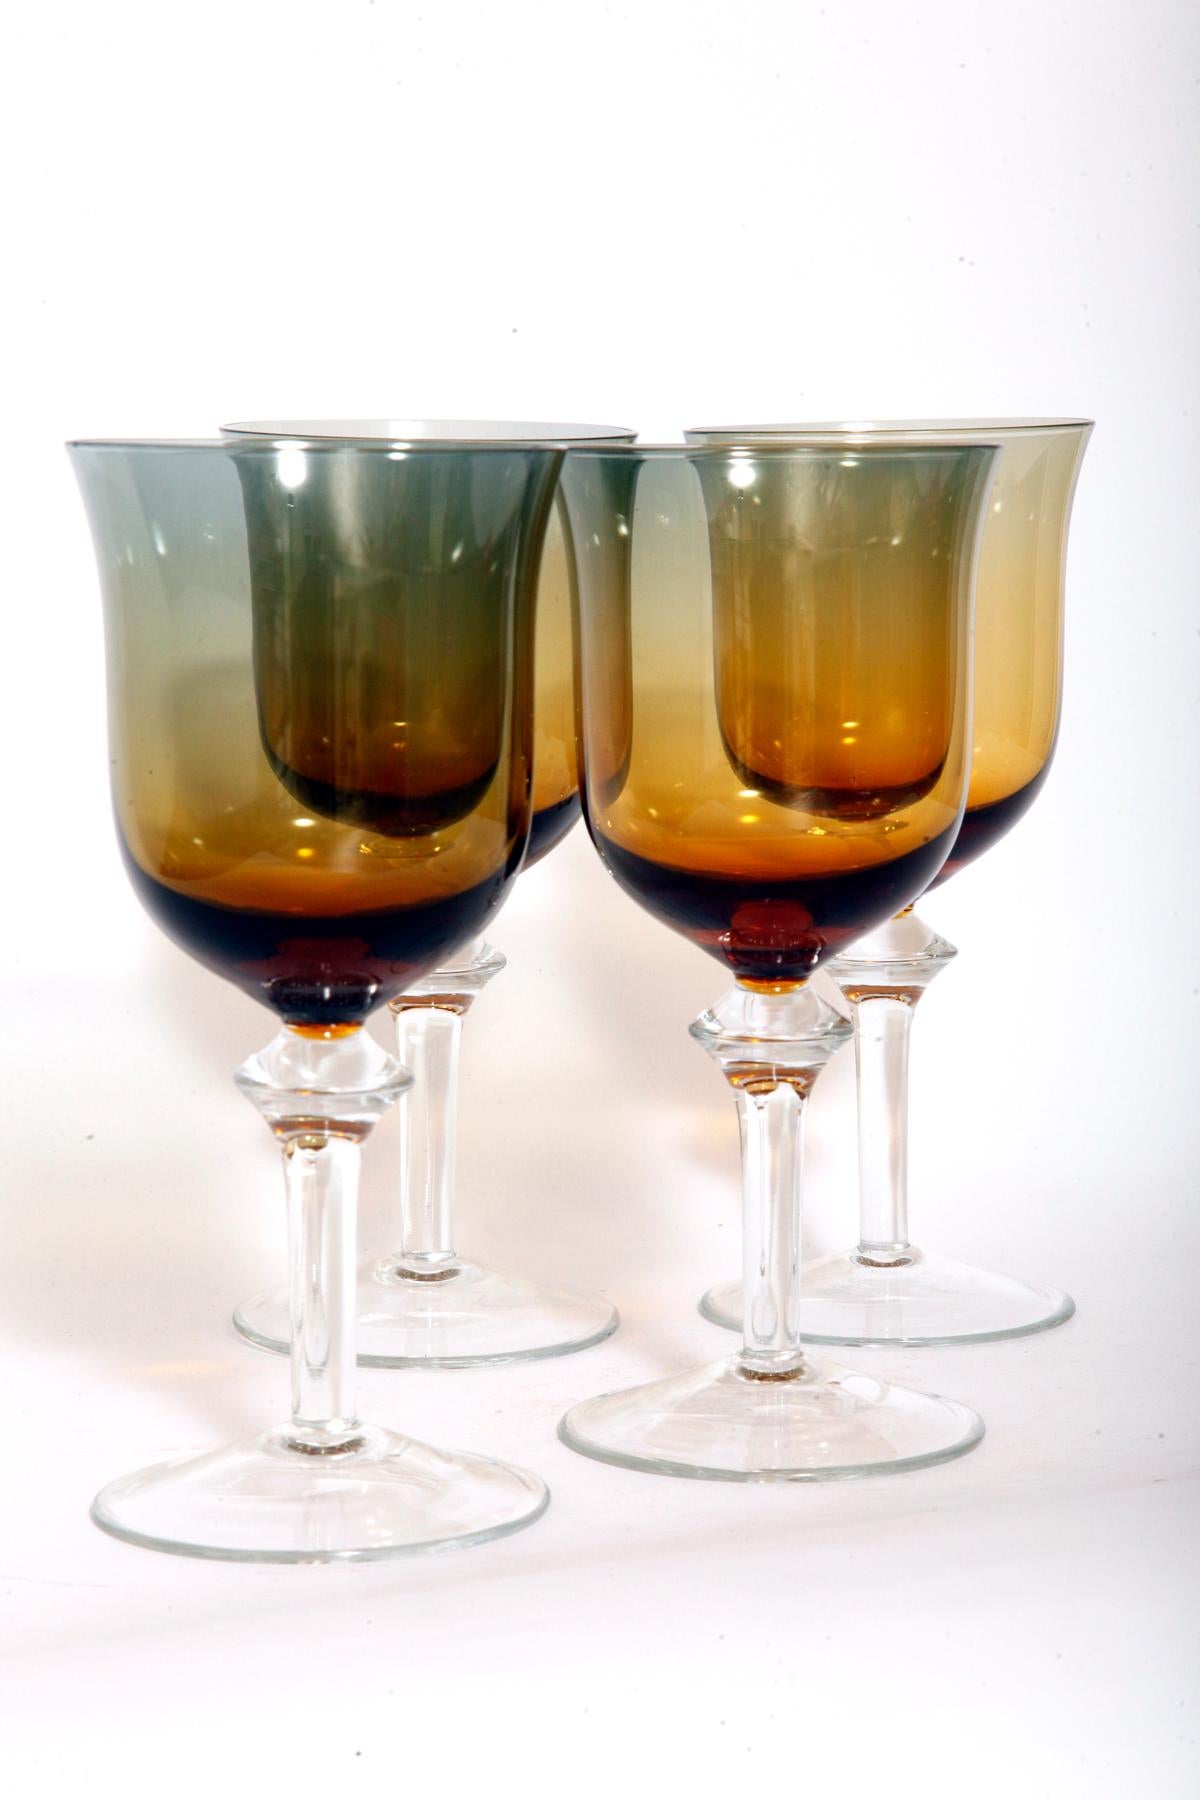 Polish Four Wine Glasses from the 